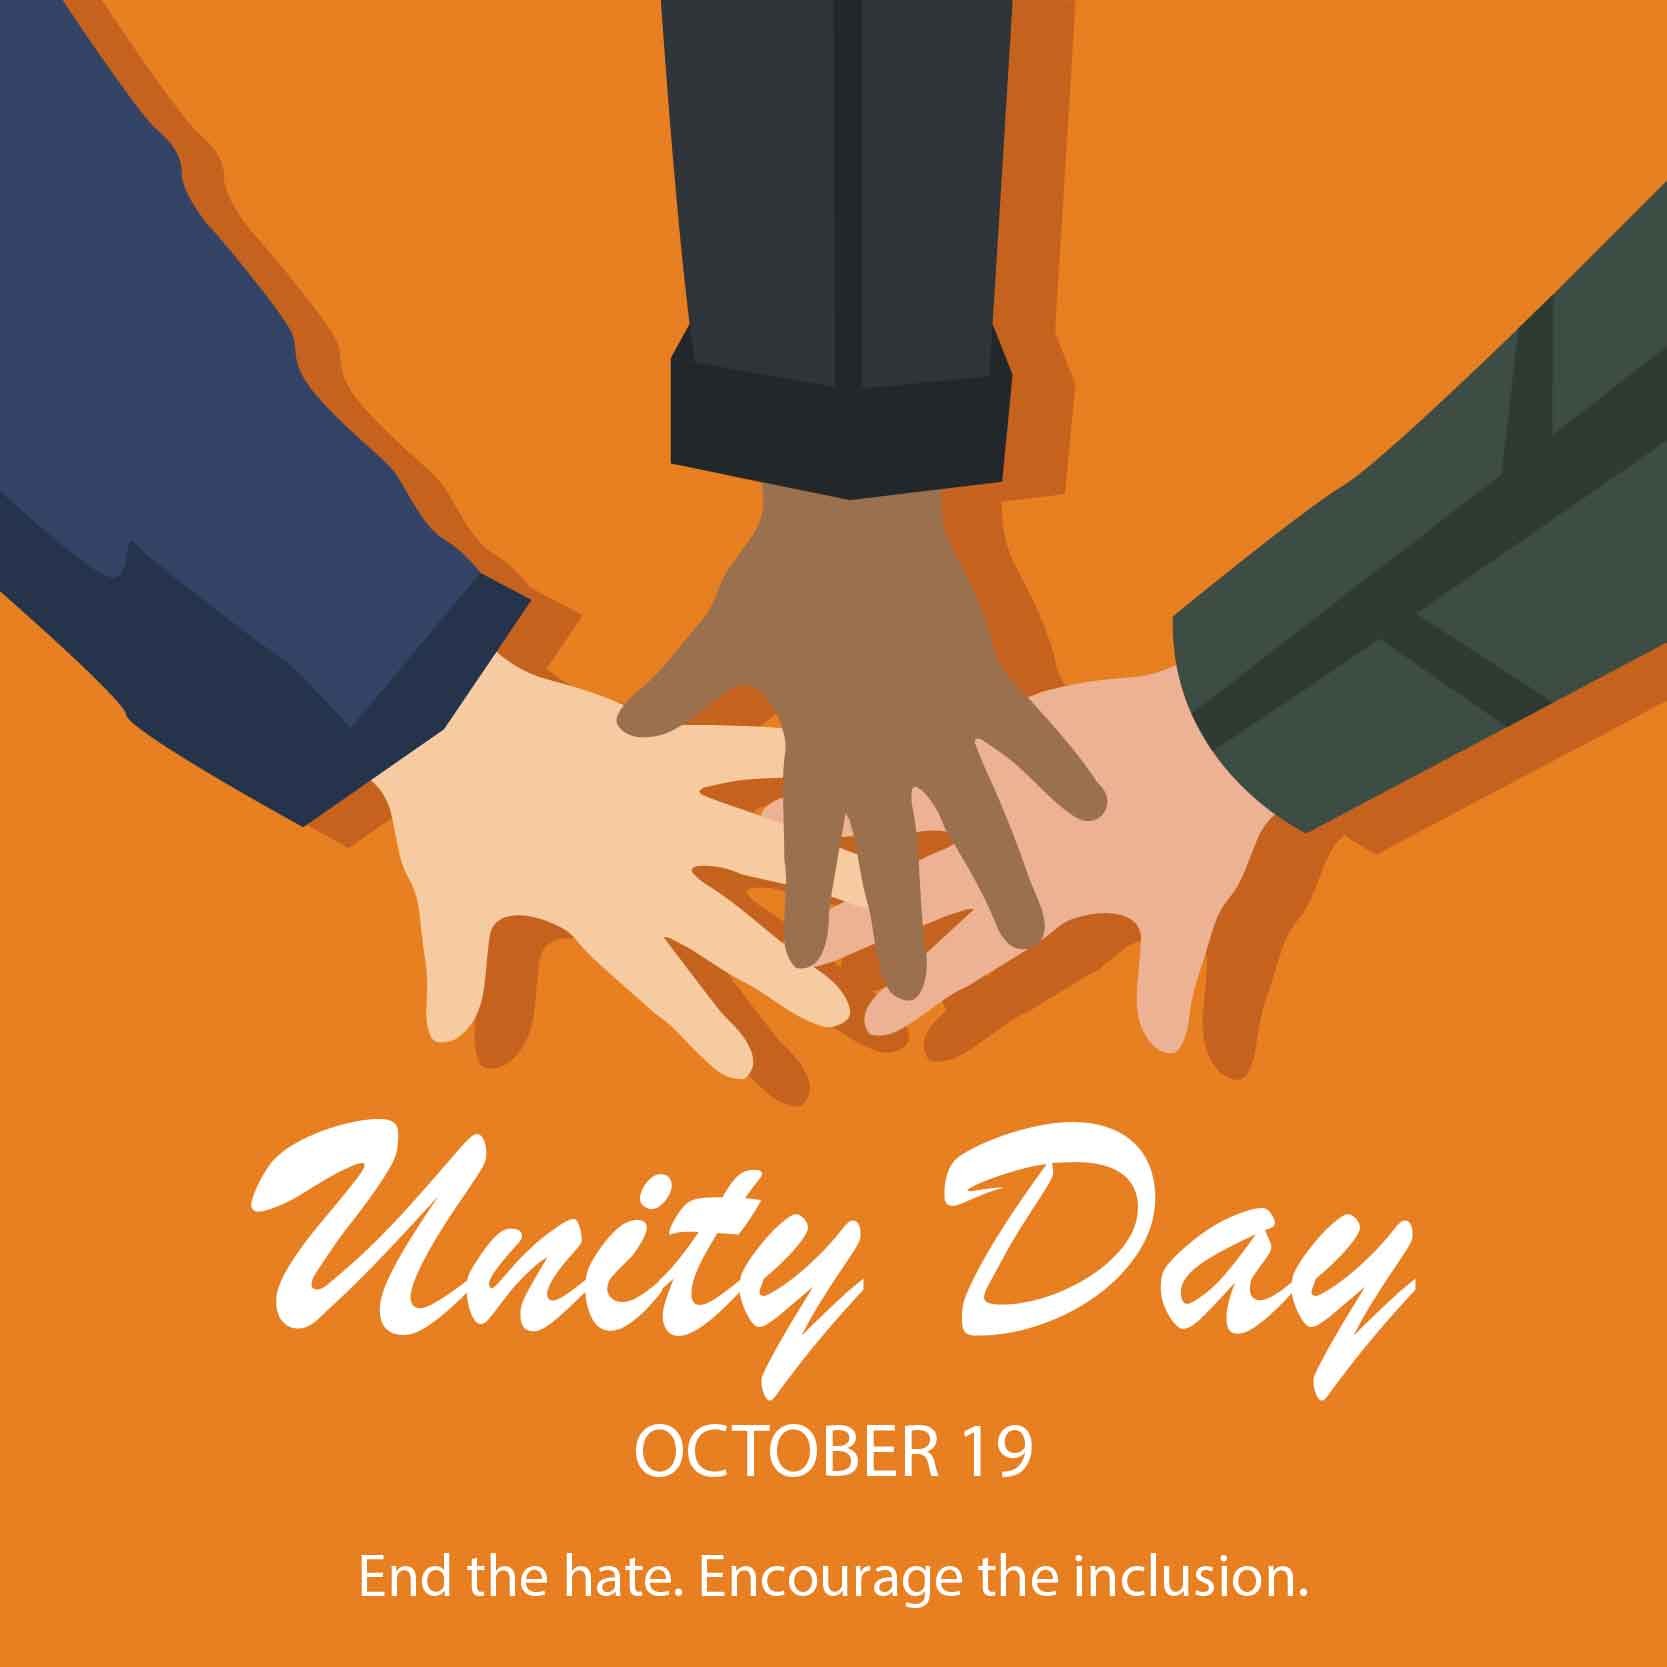 Unity Day Whatsapp Post in Illustrator, PSD, EPS, SVG, JPG, PNG